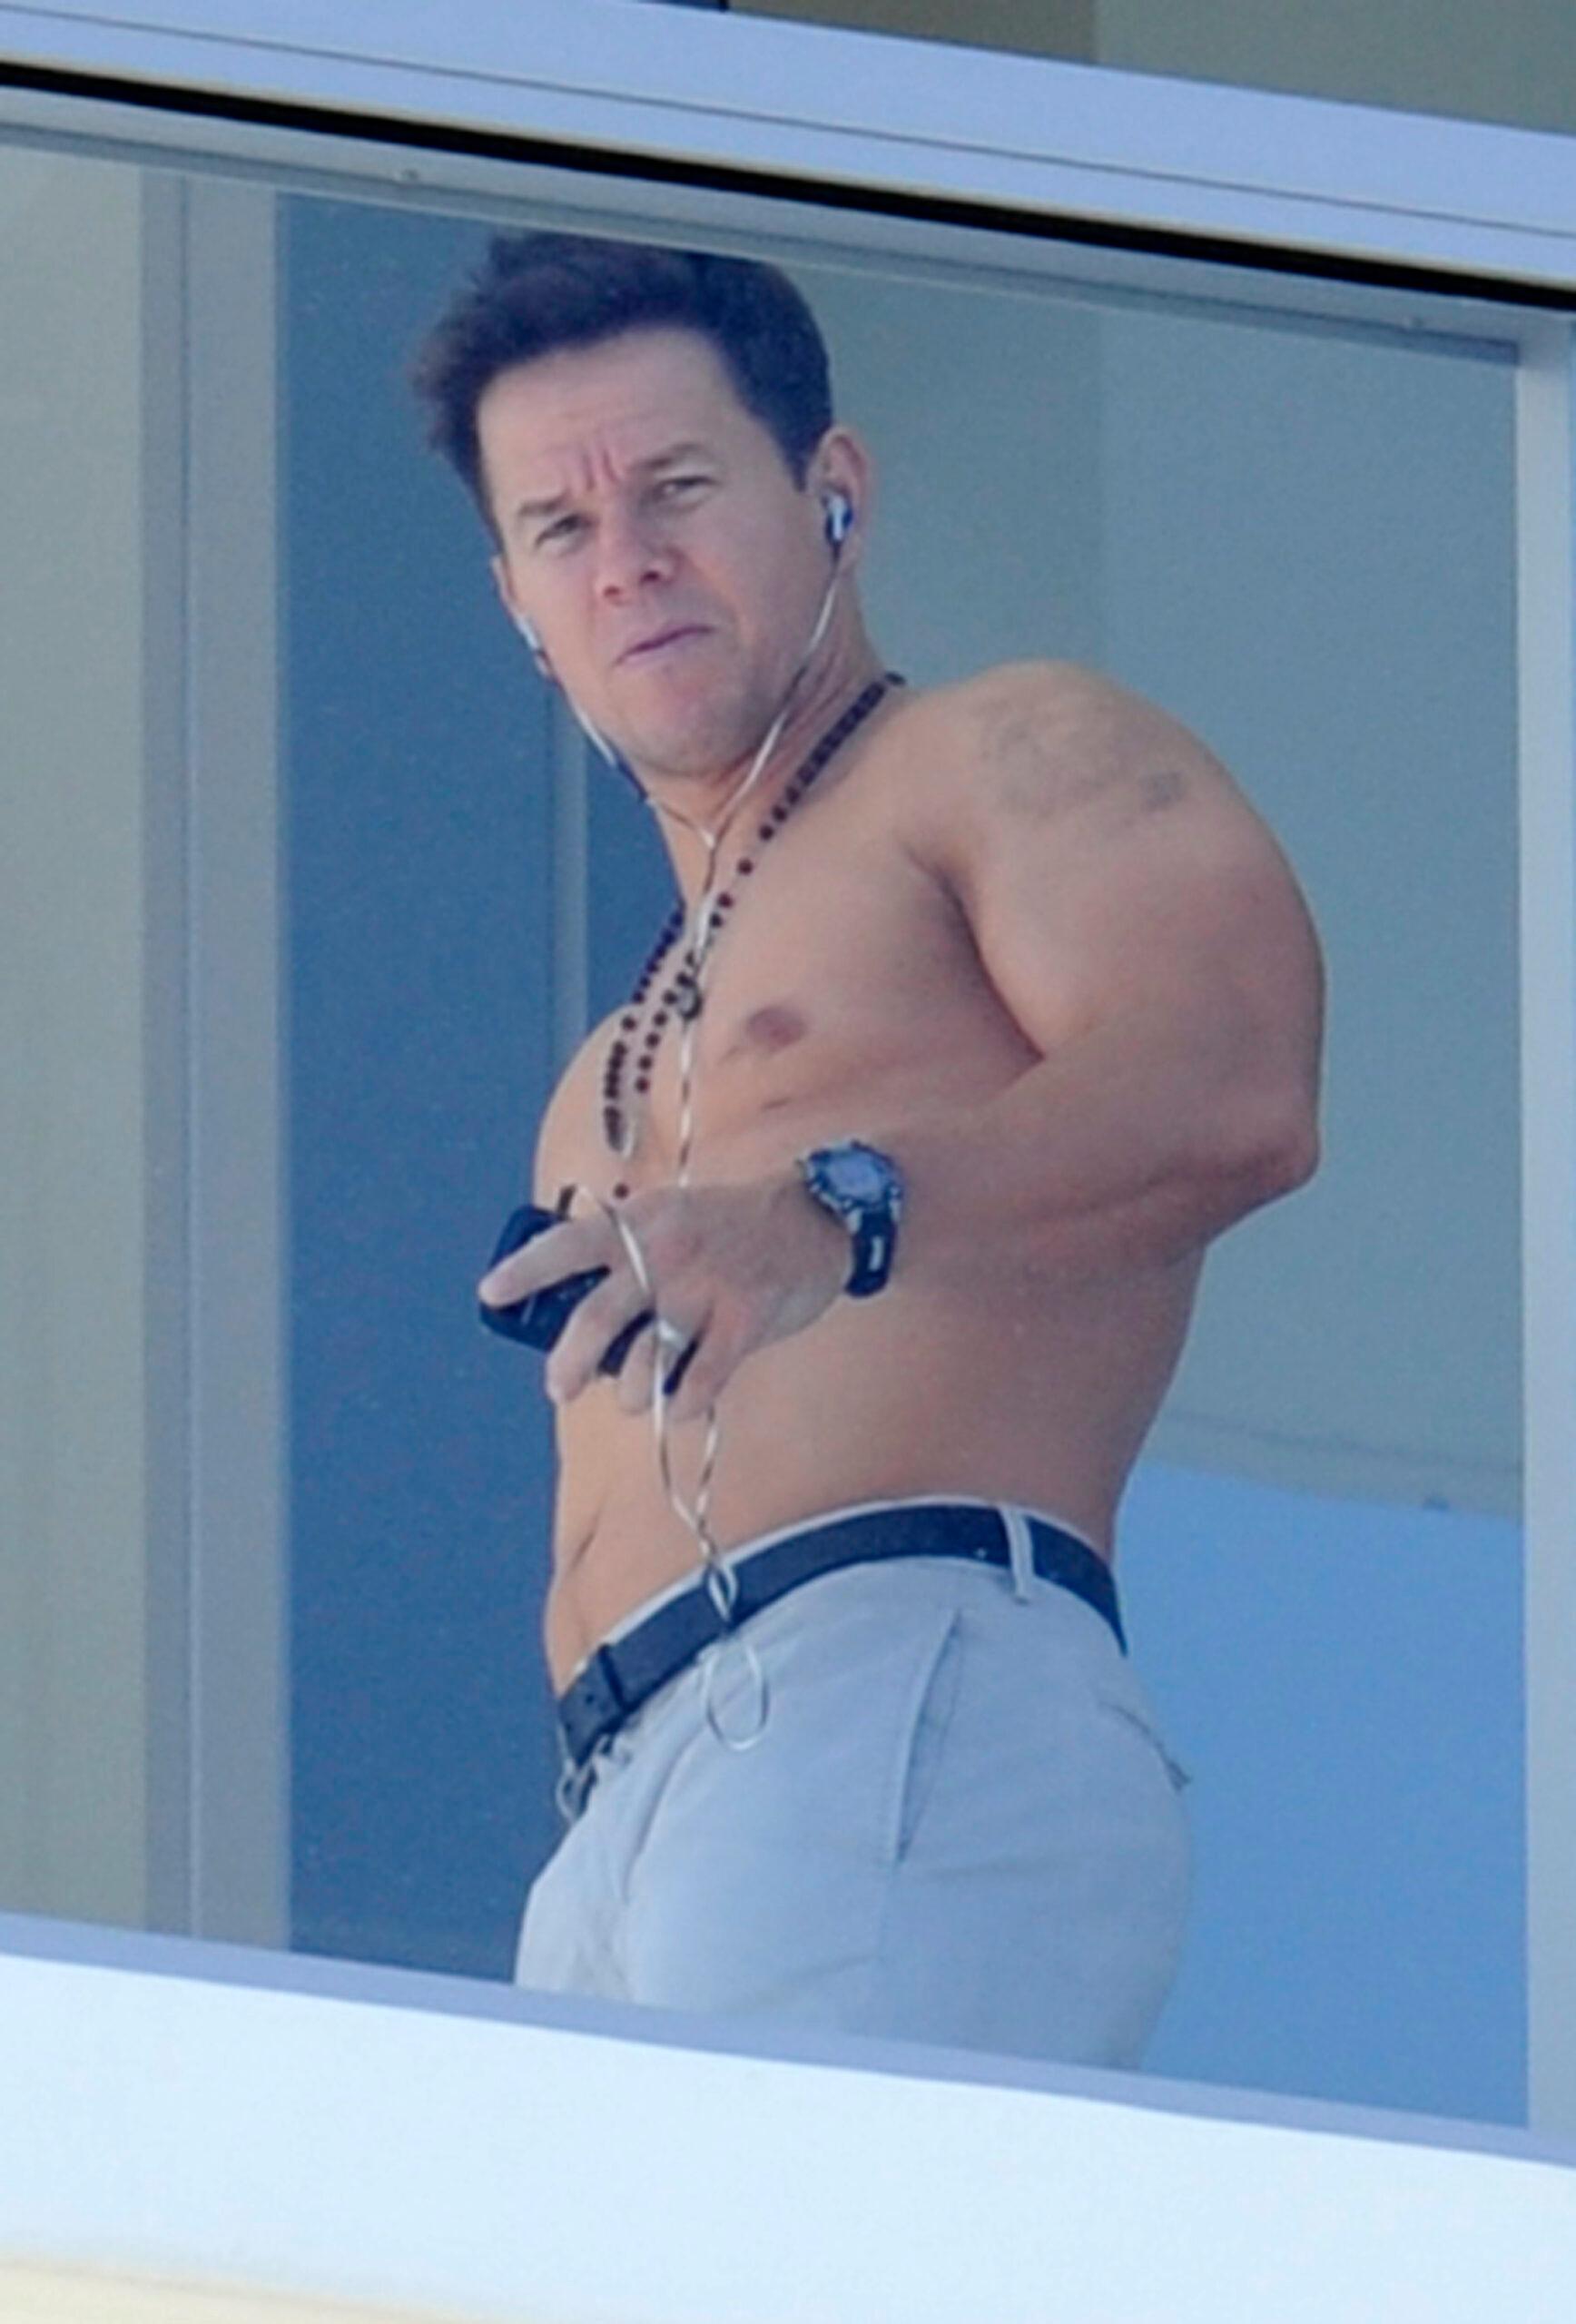 Mark Wahlberg shows off his muscles while waving shirtless from his South Beach hotel balcony